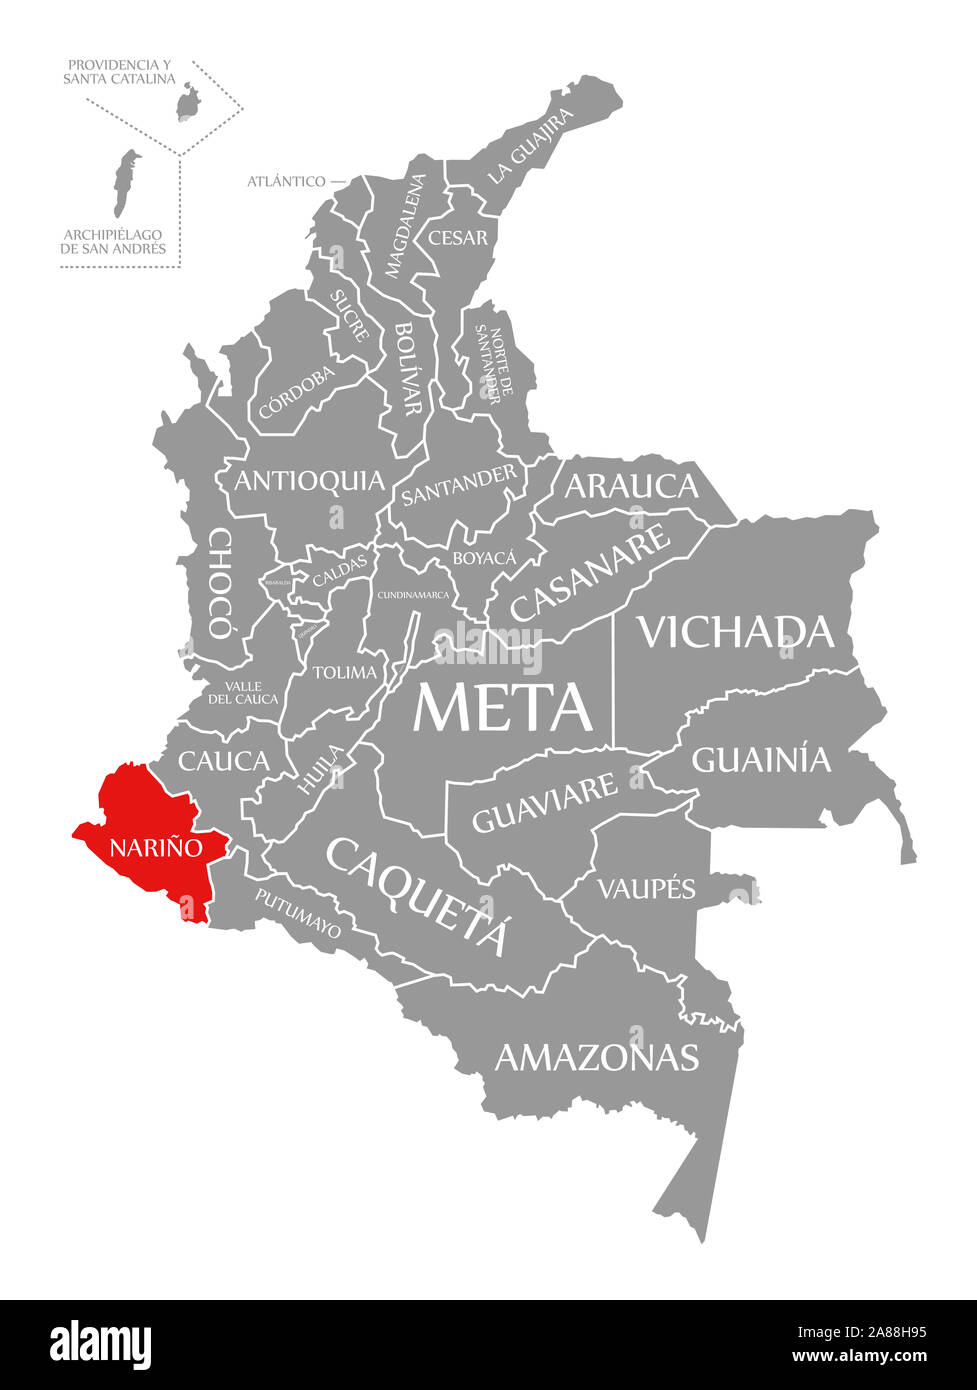 Narino red highlighted in map of Colombia Stock Photo